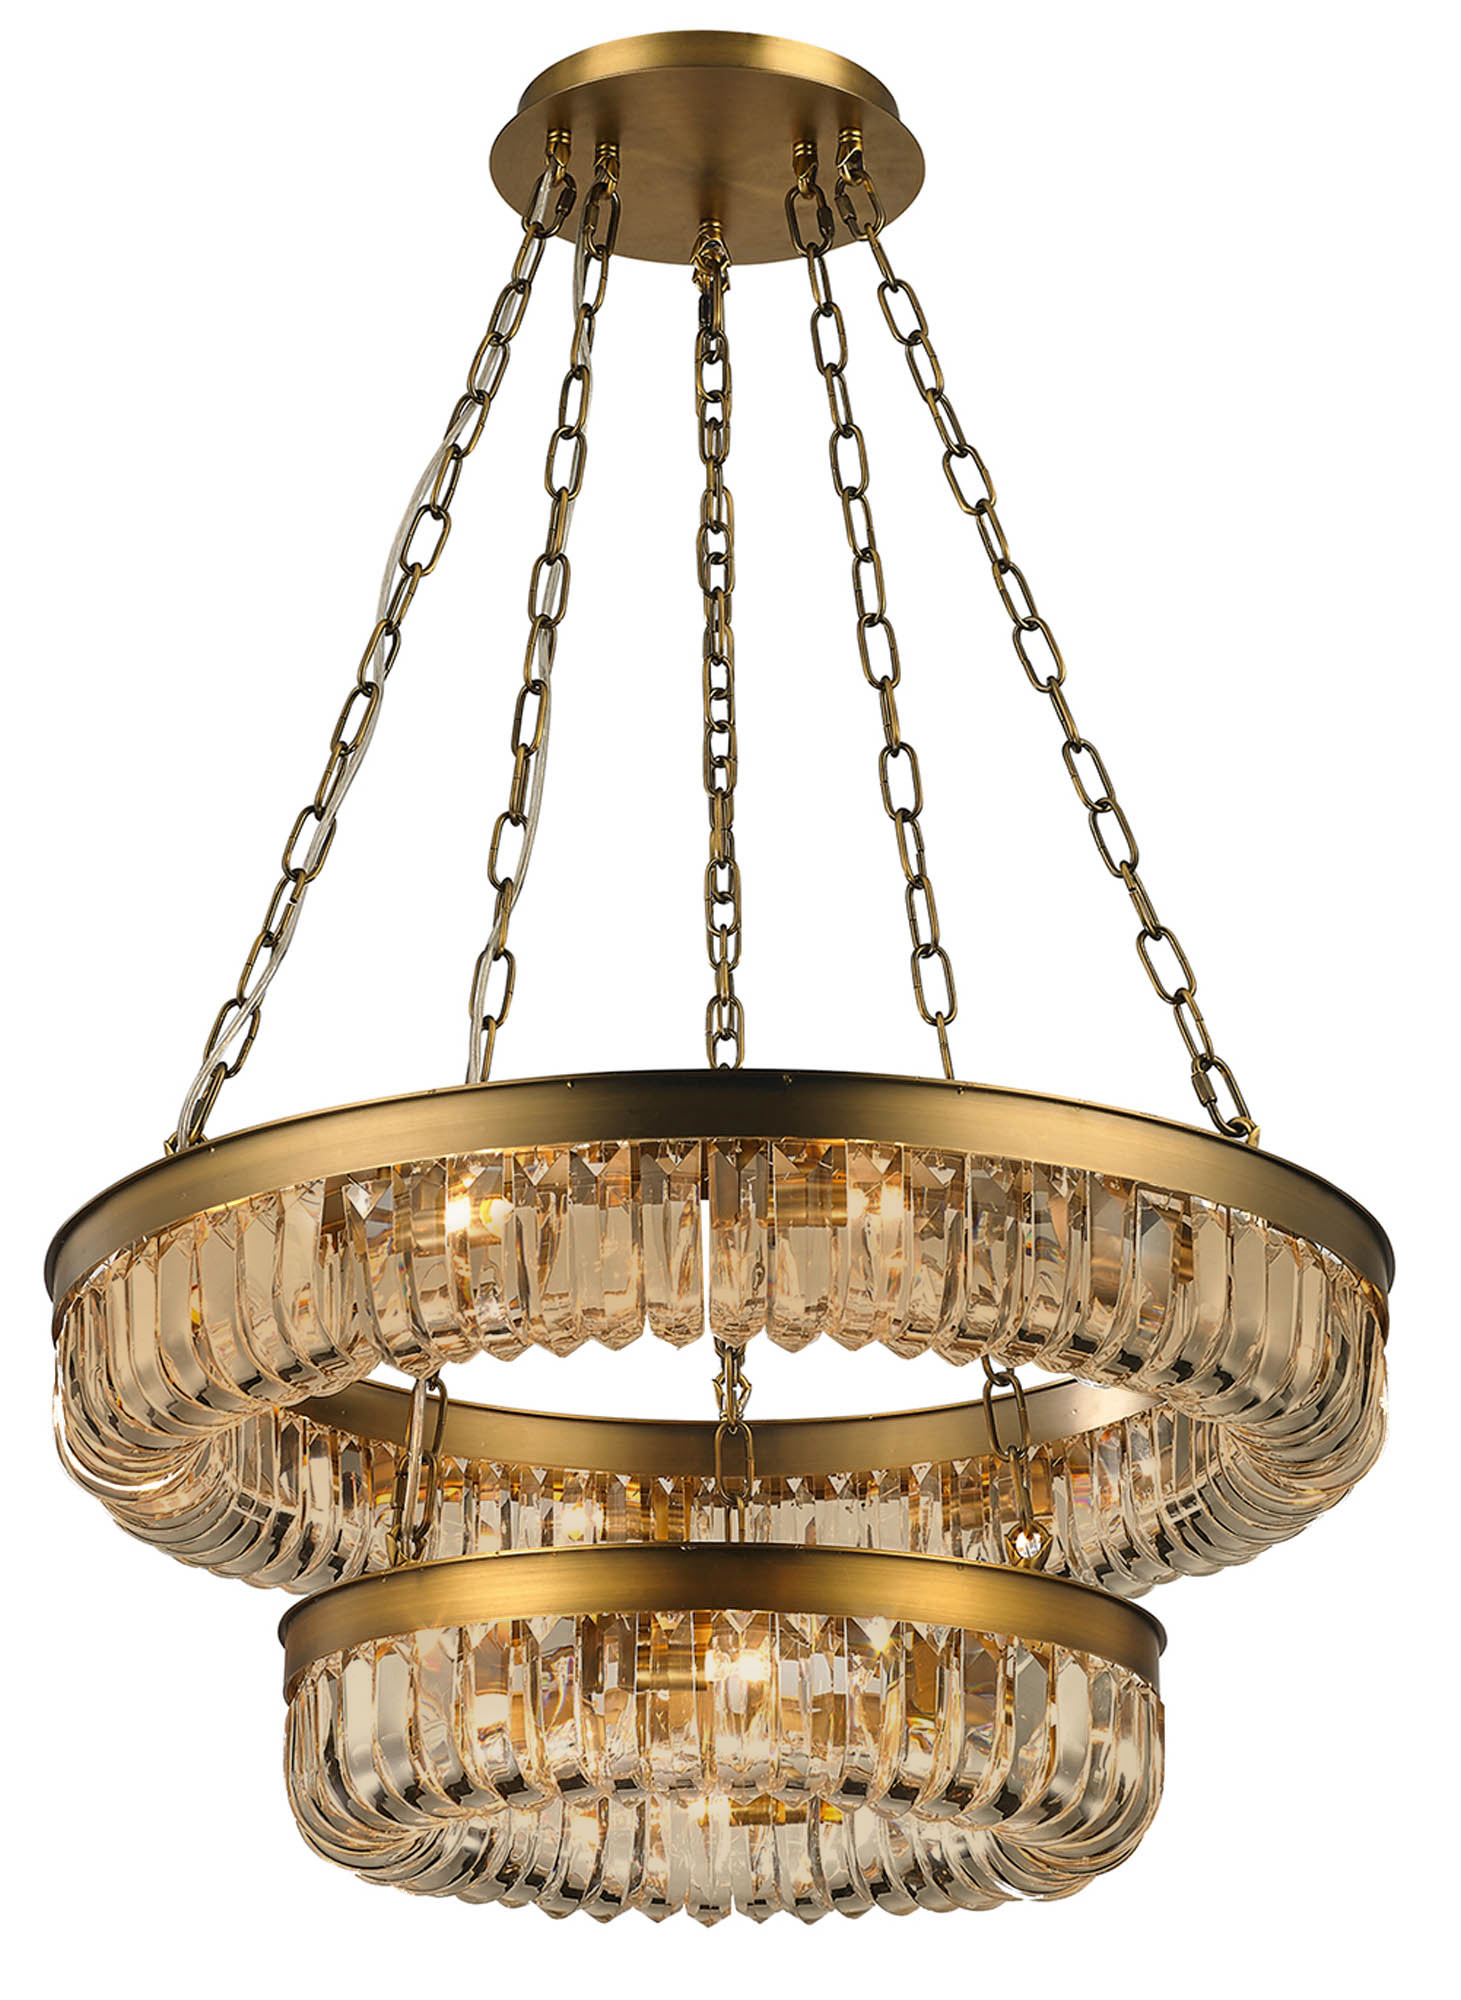 MD7197-16  Special Pendant 16 Light